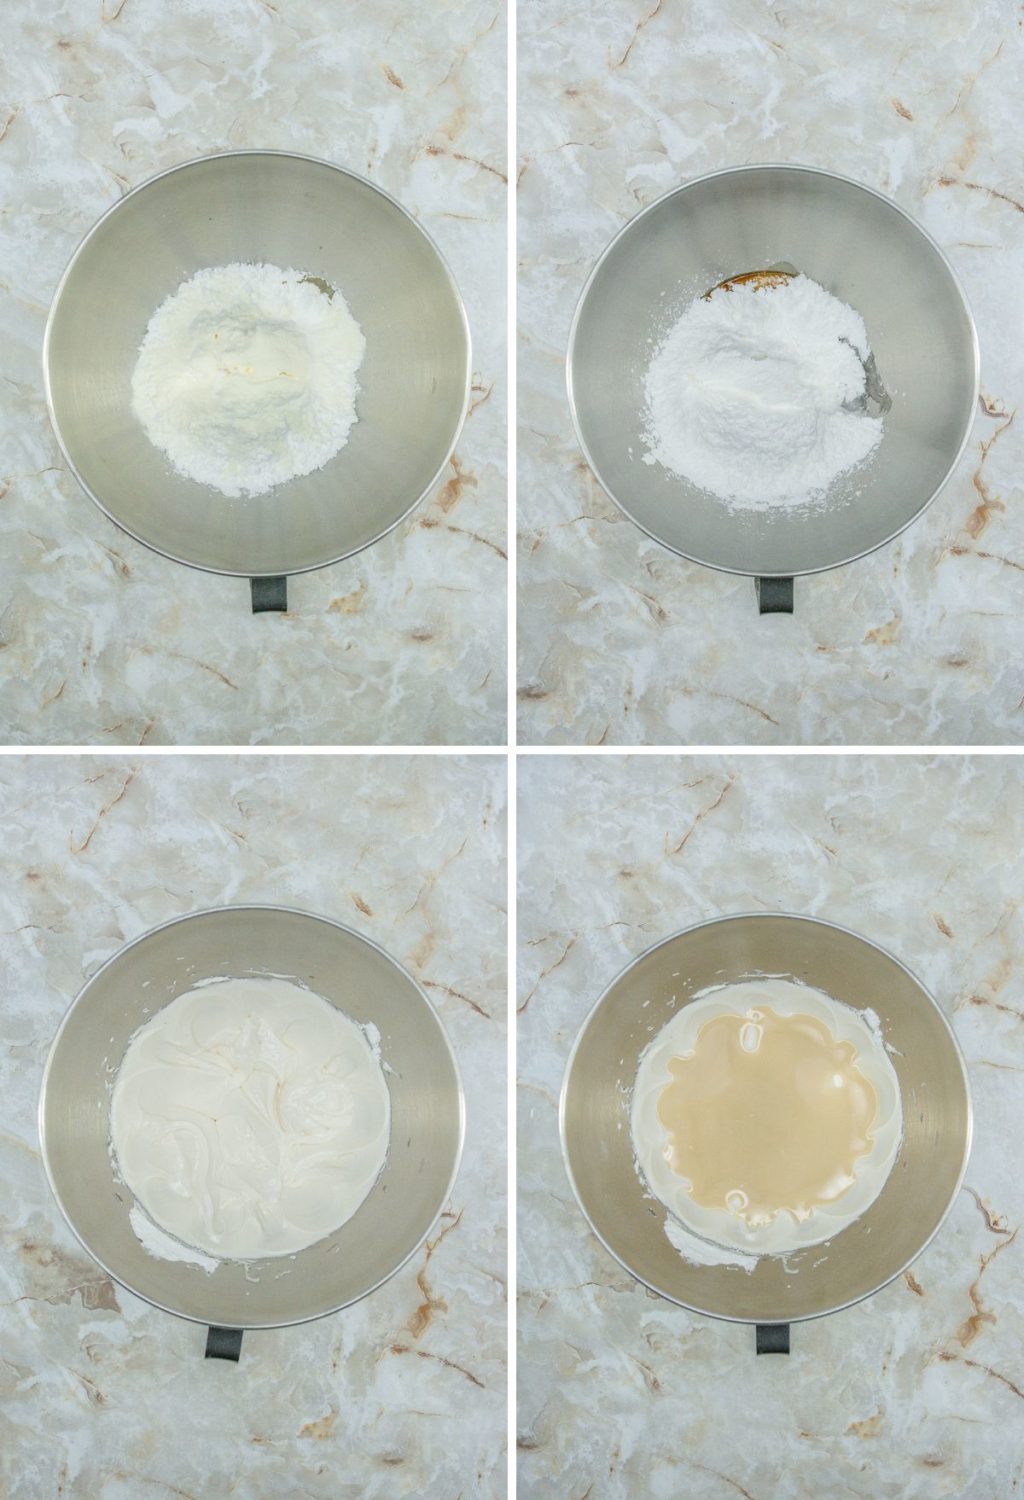 Four pictures showing the process of making ice cream.